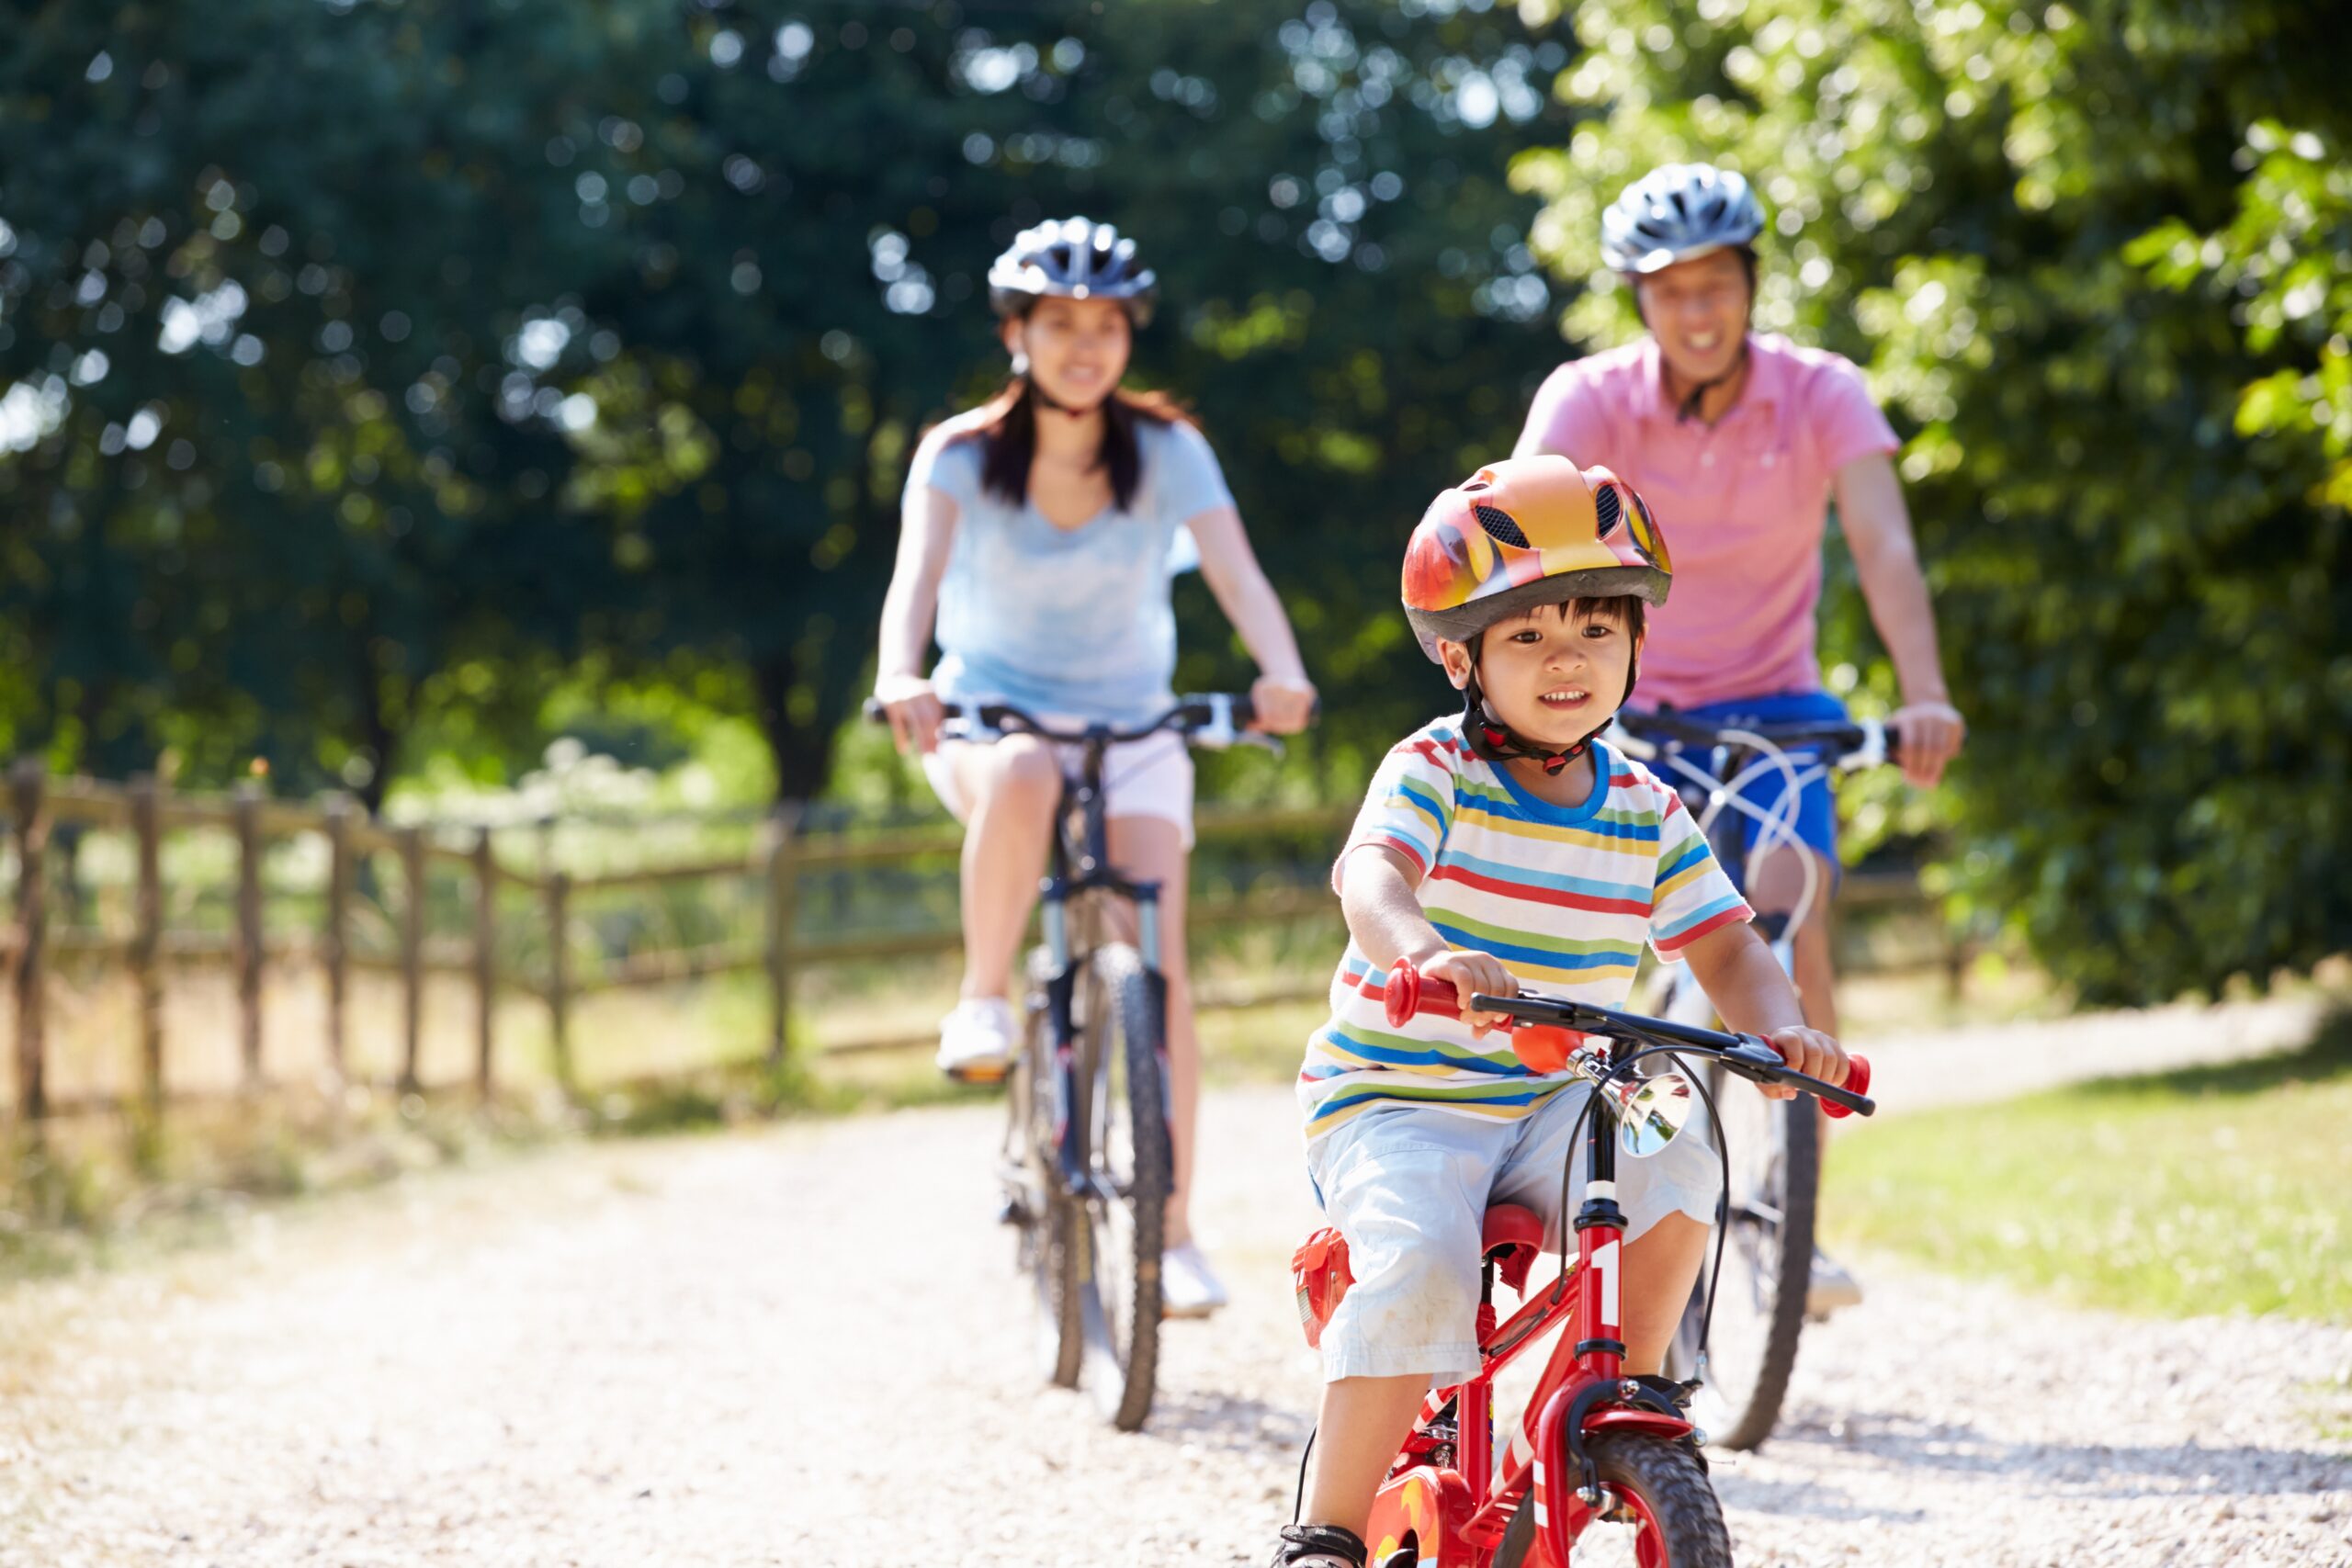 Two adults and a child ride their bikes on a gravel path through trees.